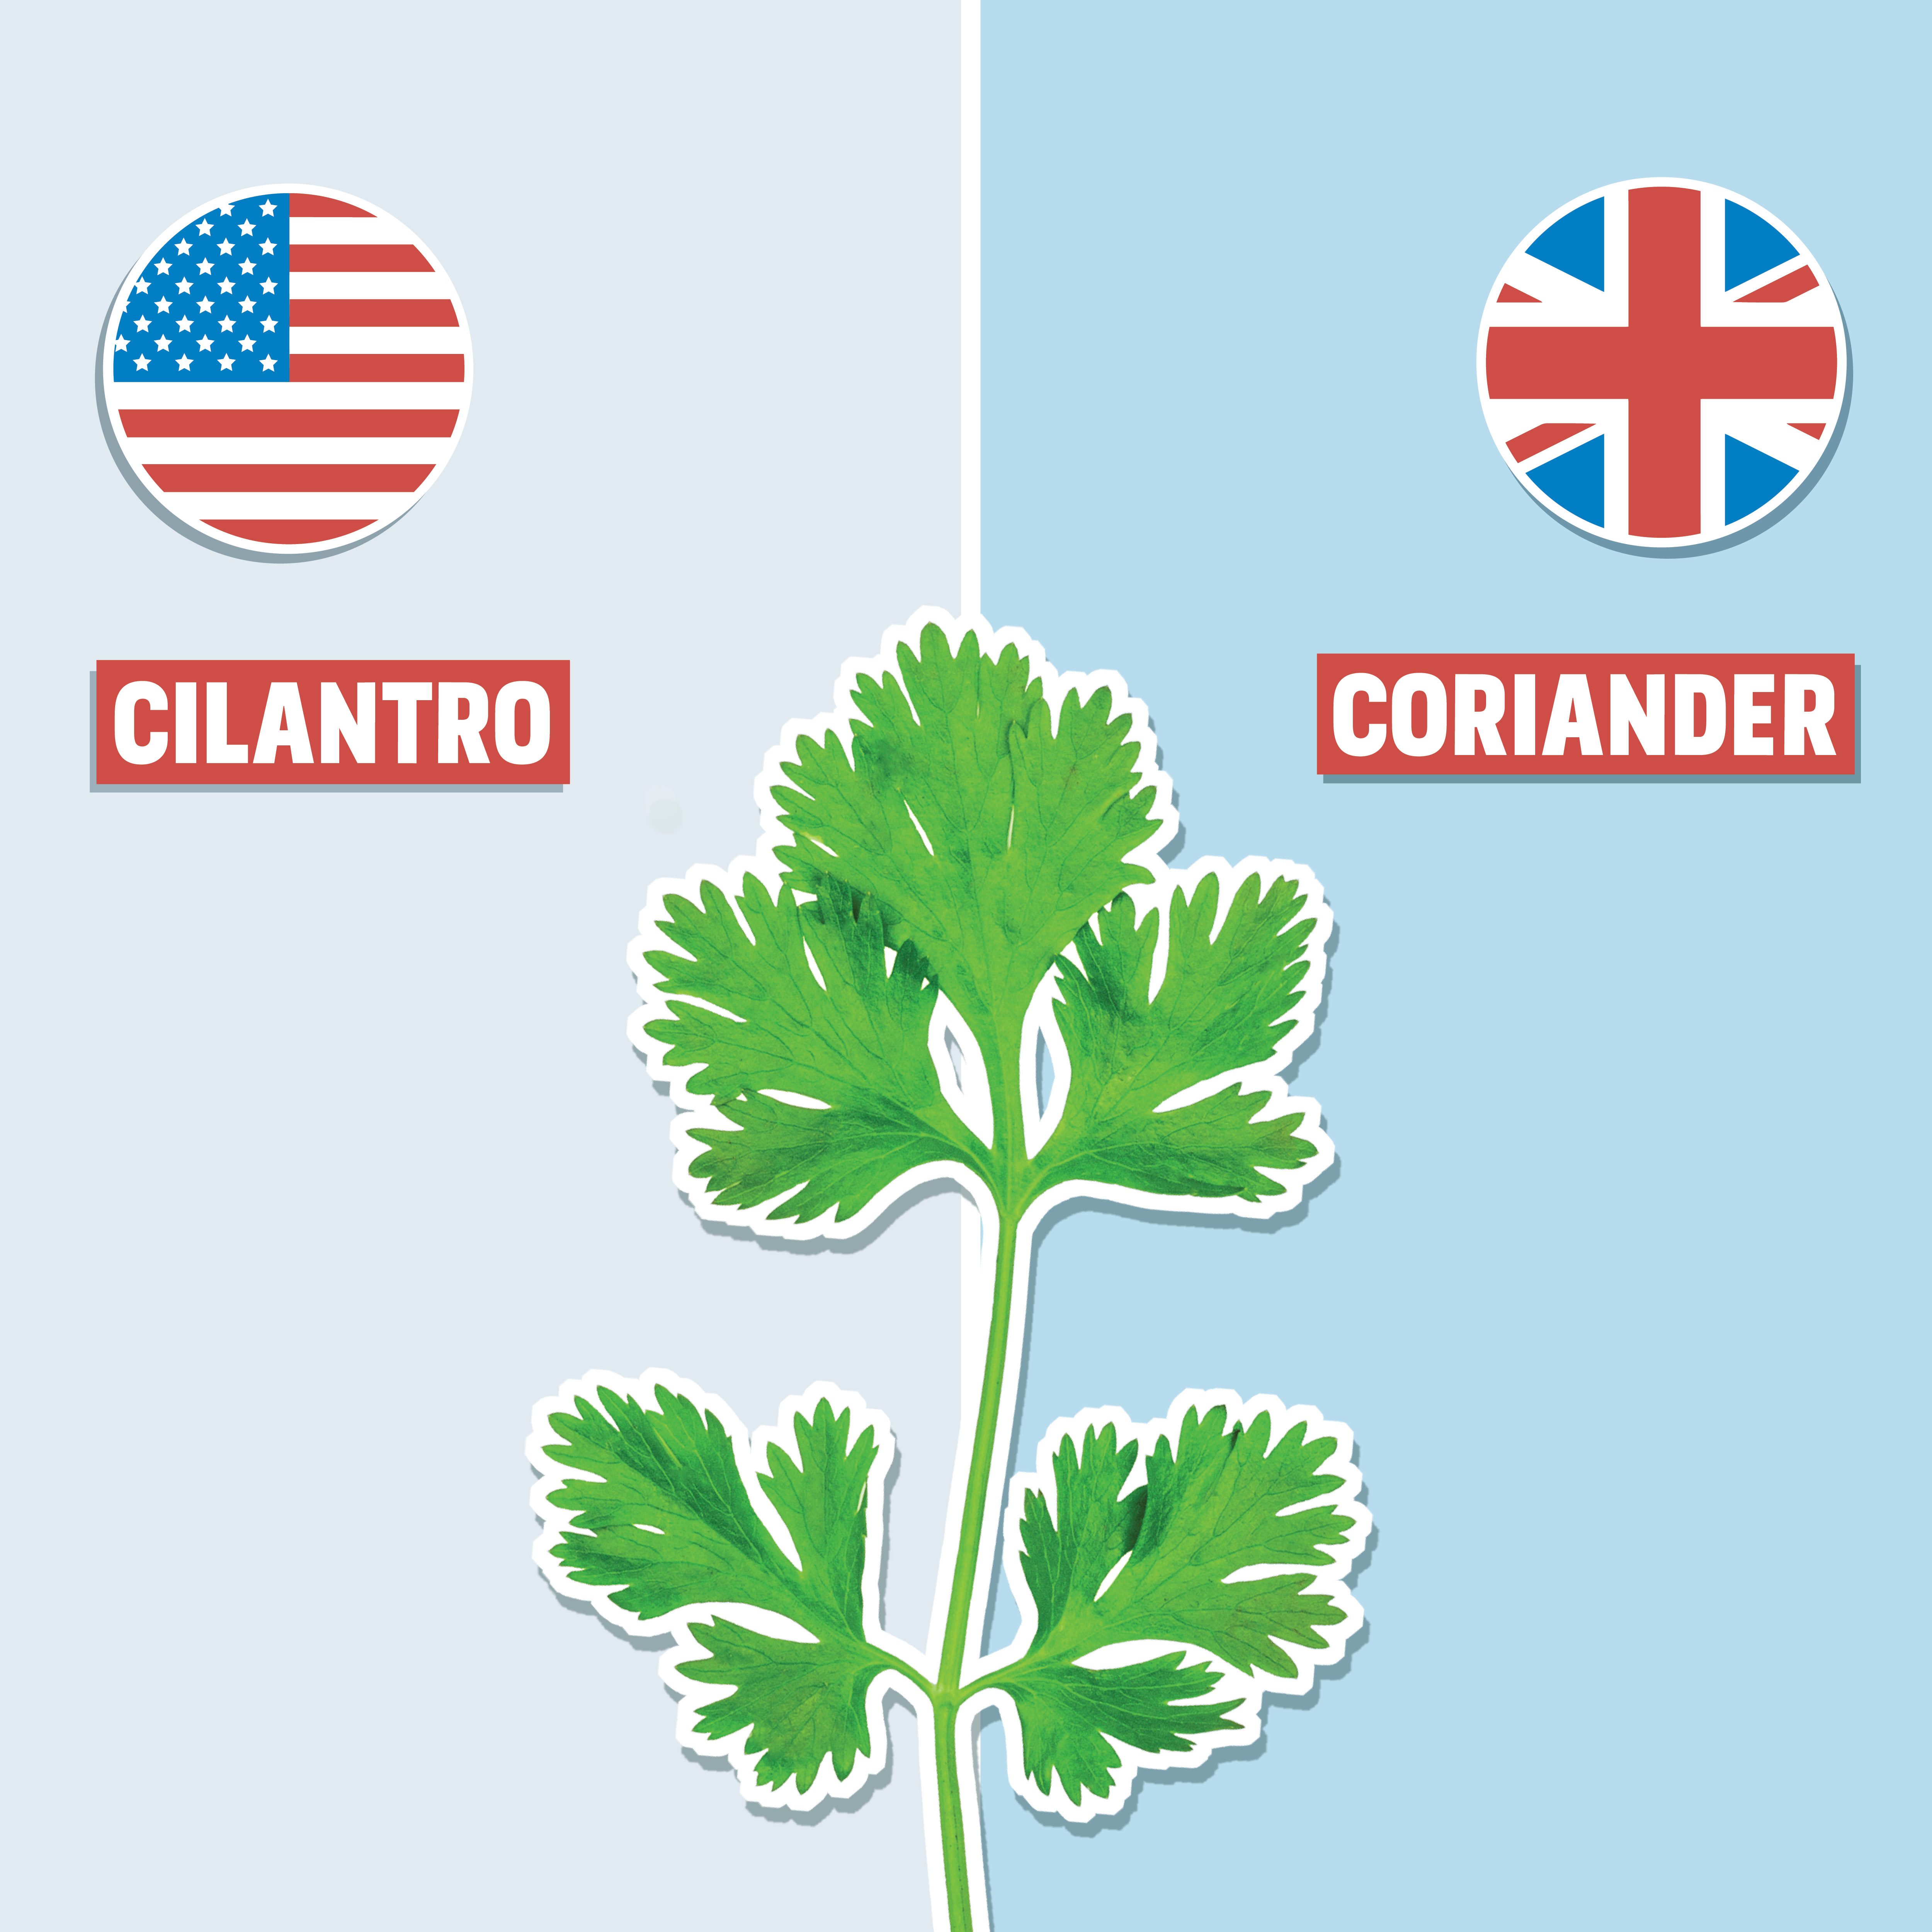 cilantro on blue background with american and british english pronunciation on either side